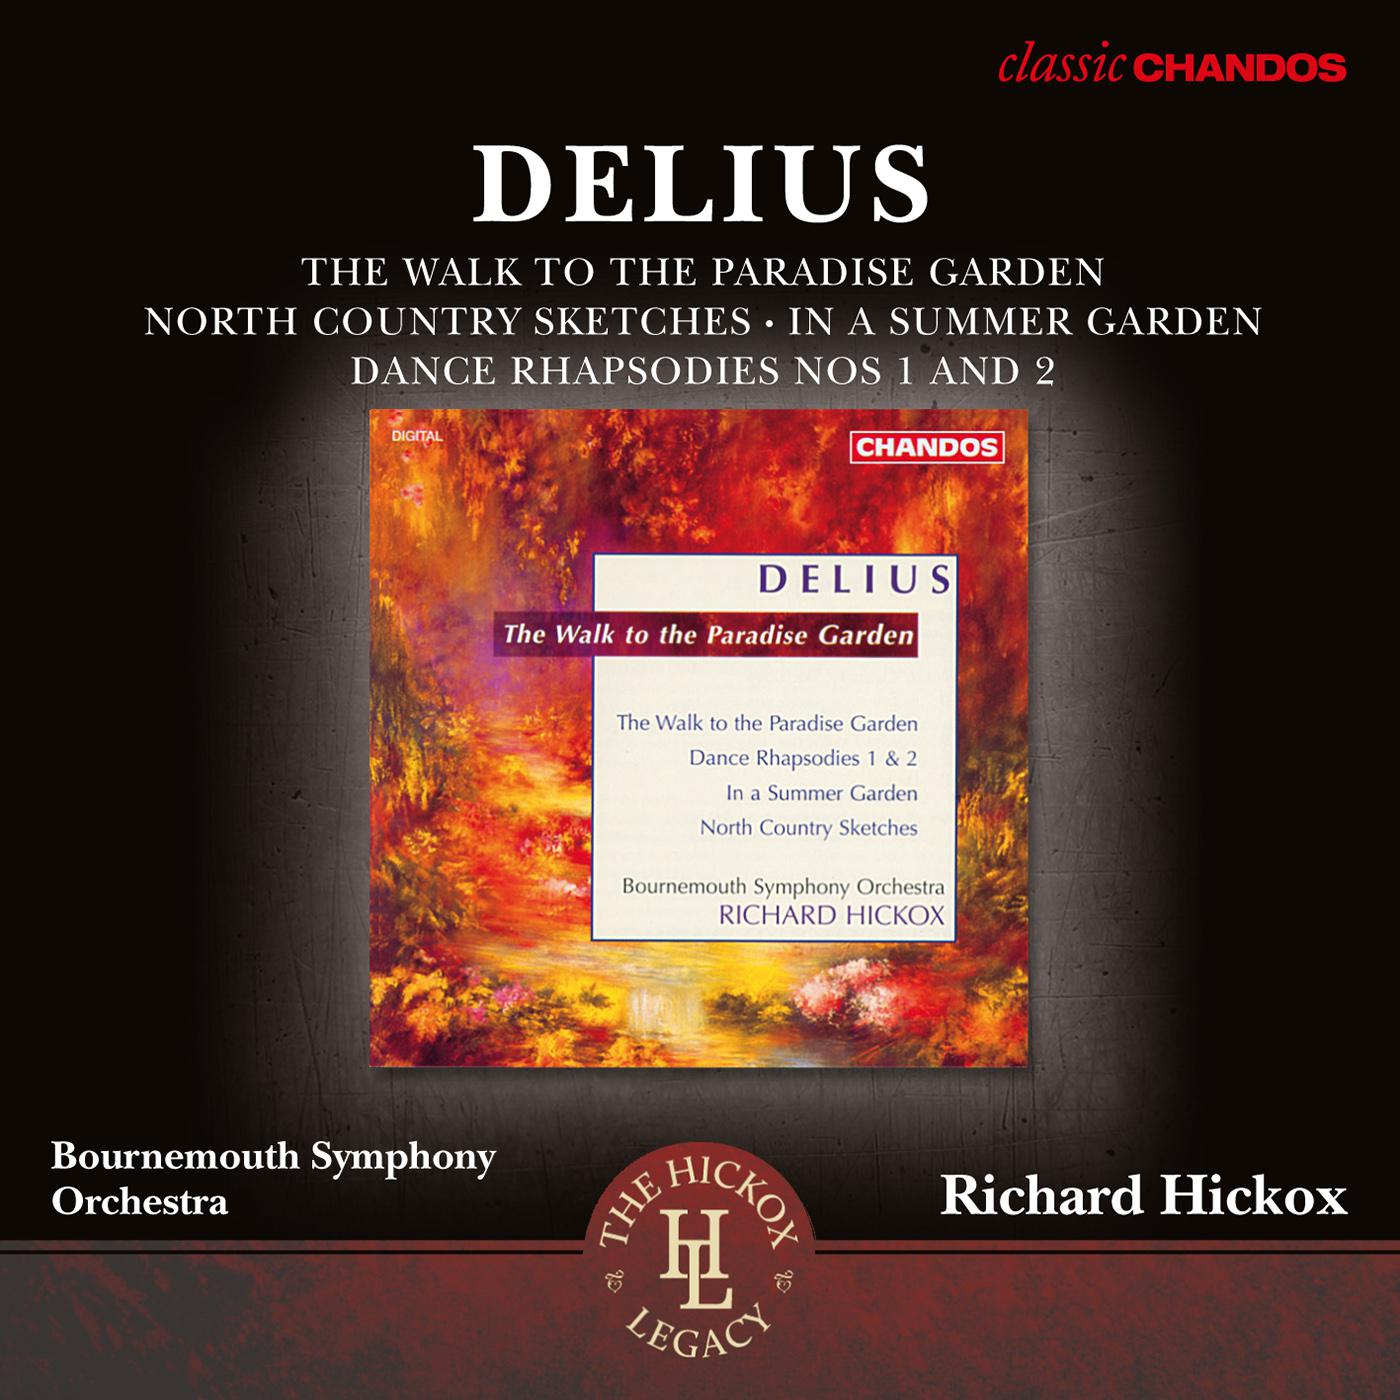 DELIUS, F.: Orchestral Music (Bournemouth Symphony, Hickox)